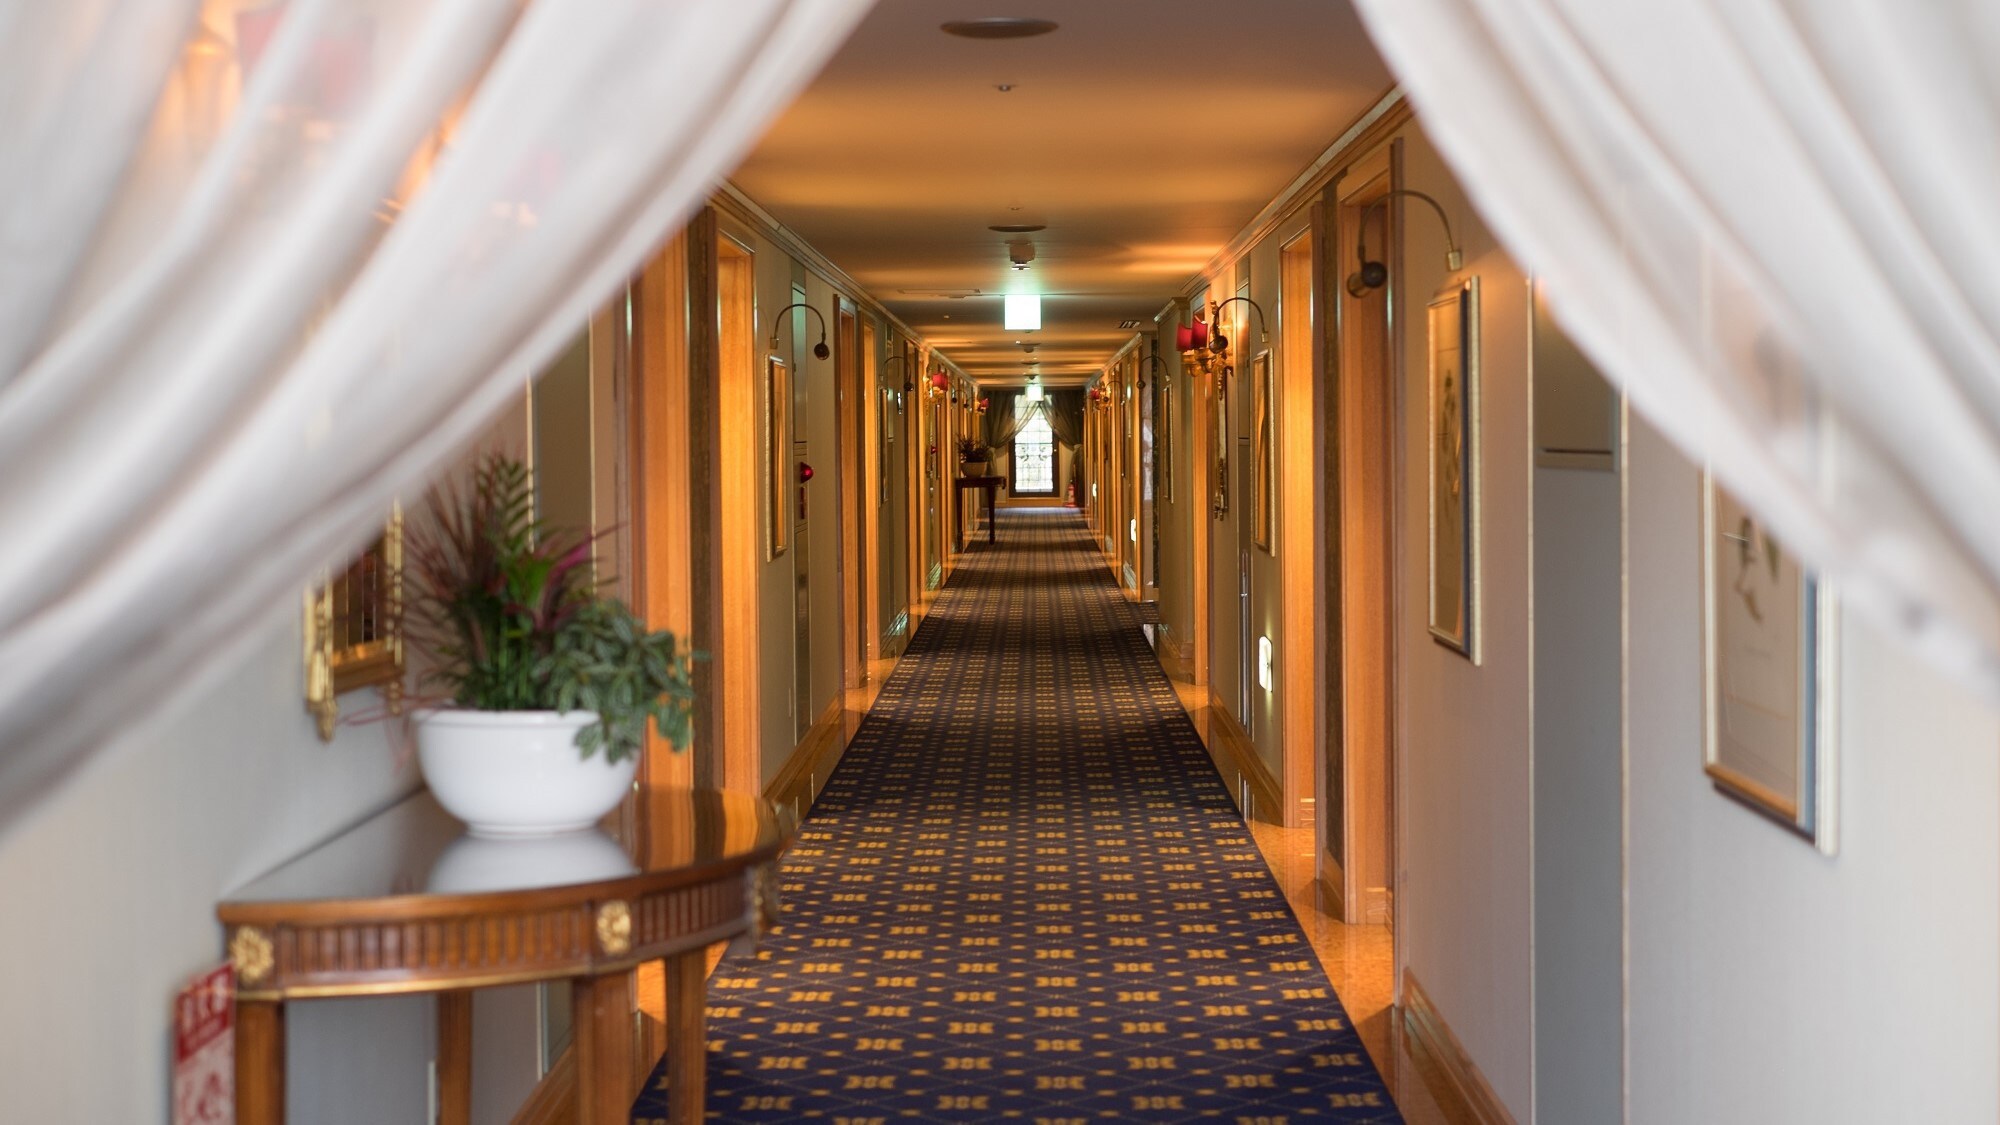 Corridor on the guest room floor like a petit hotel in Europe